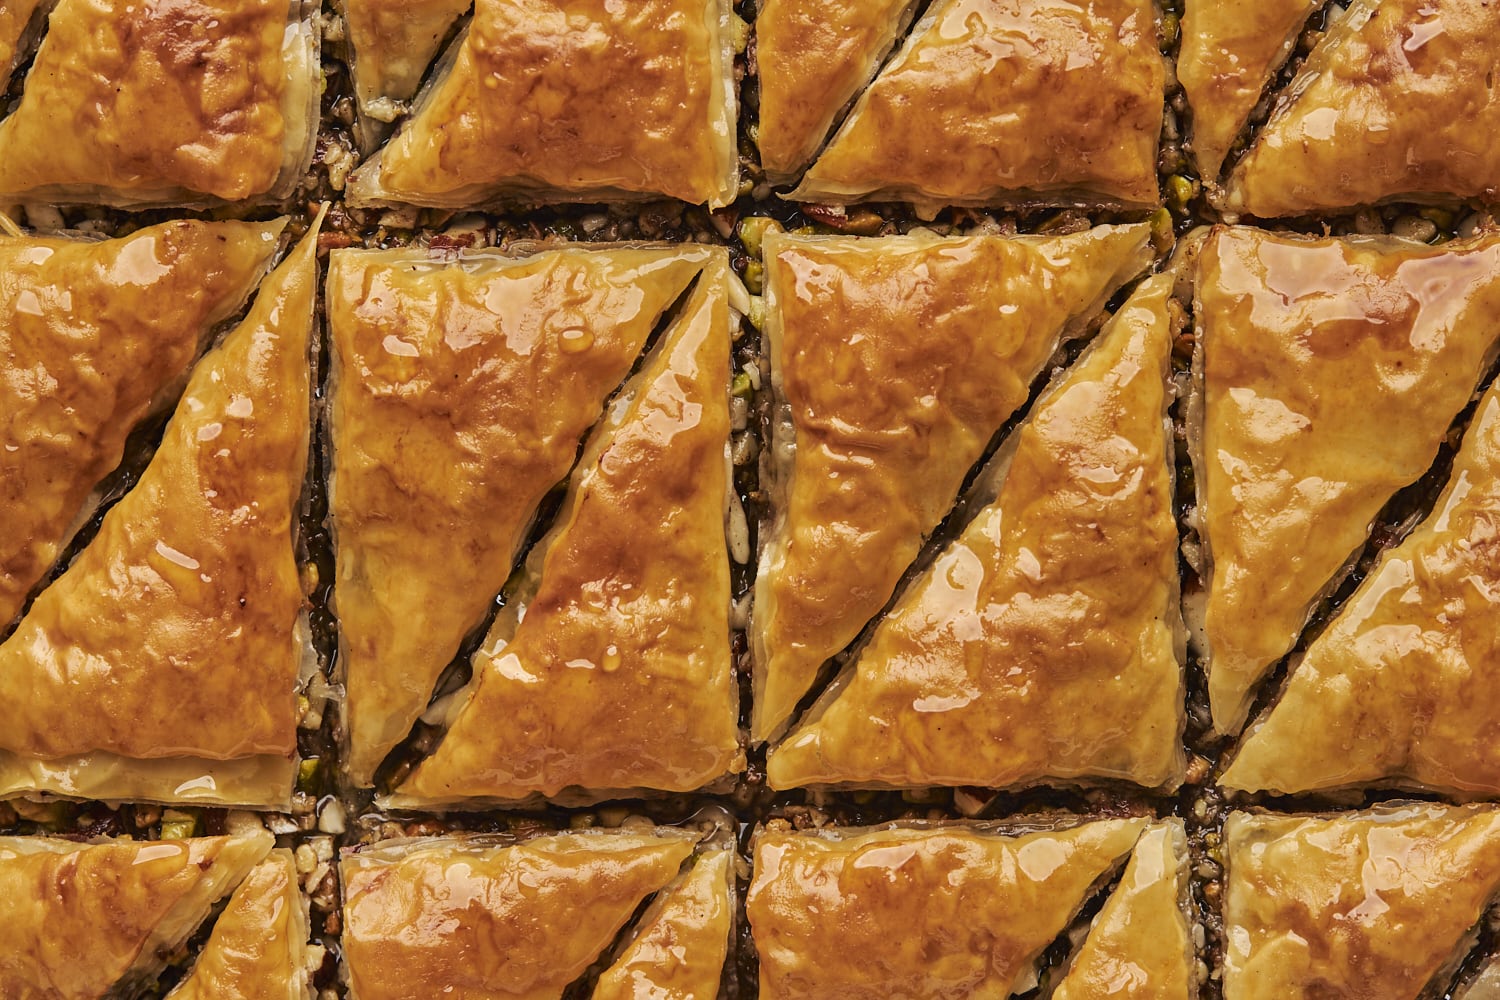 How to Make Greek Baklava, Phyllo Pastry